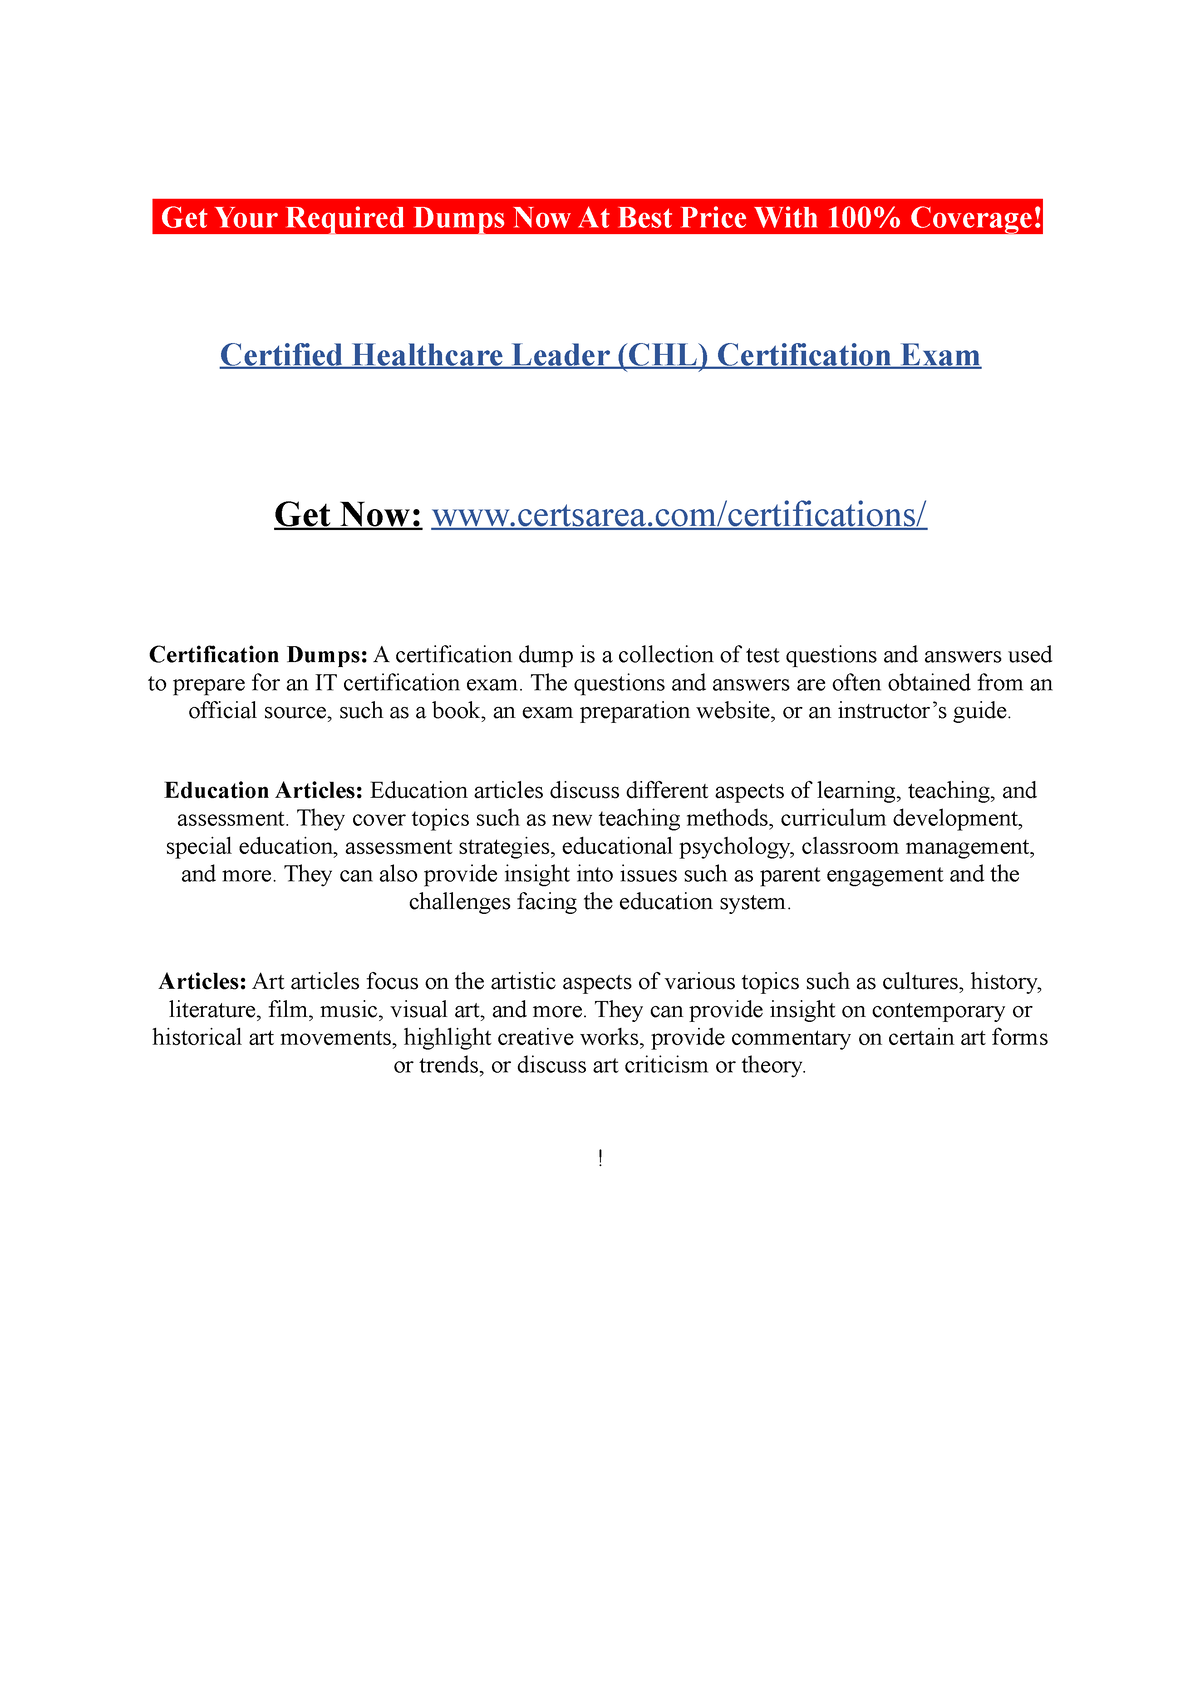 Certified Healthcare Leader (CHL) Certification Exam Get Your